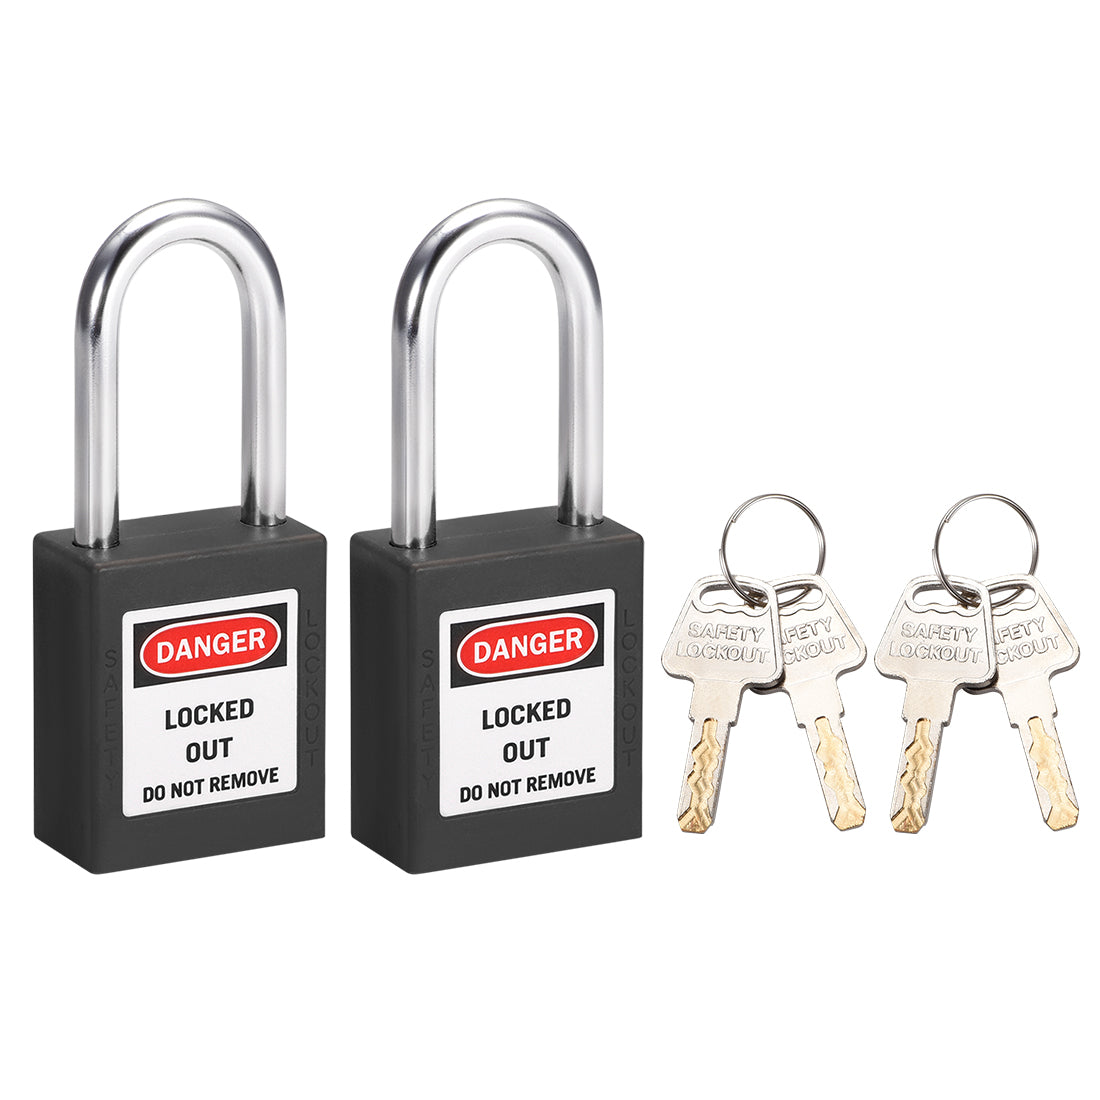 uxcell Uxcell Lockout Tagout Safety Padlock 38mm Steel Shackle Keyed Different Black 2Pcs